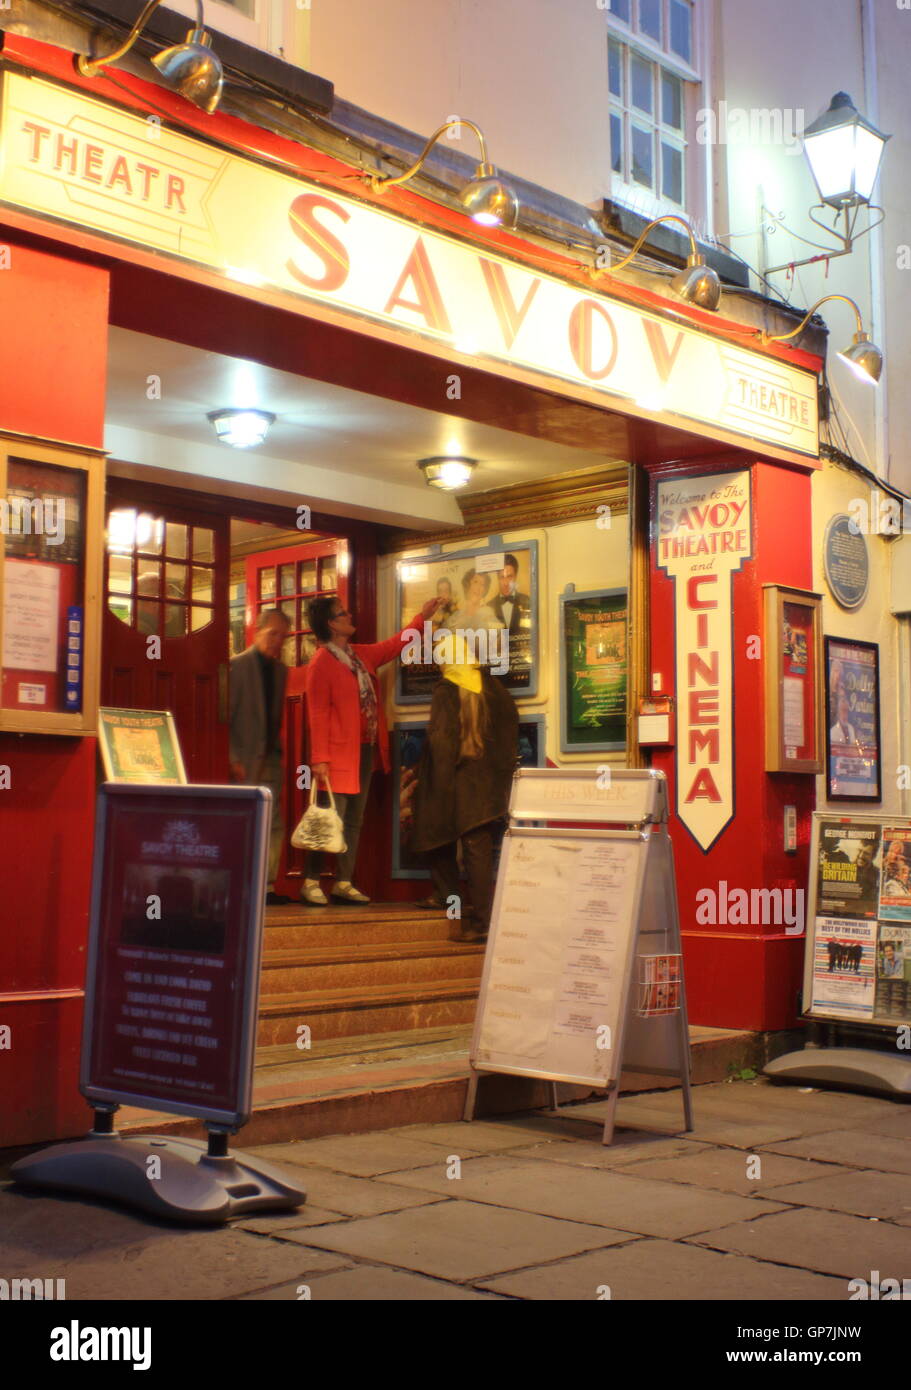 Theatre goers exit the Savoy Theatre and cinema in the town centre of Monmouth, Monmouthshire, Wales. Stock Photo